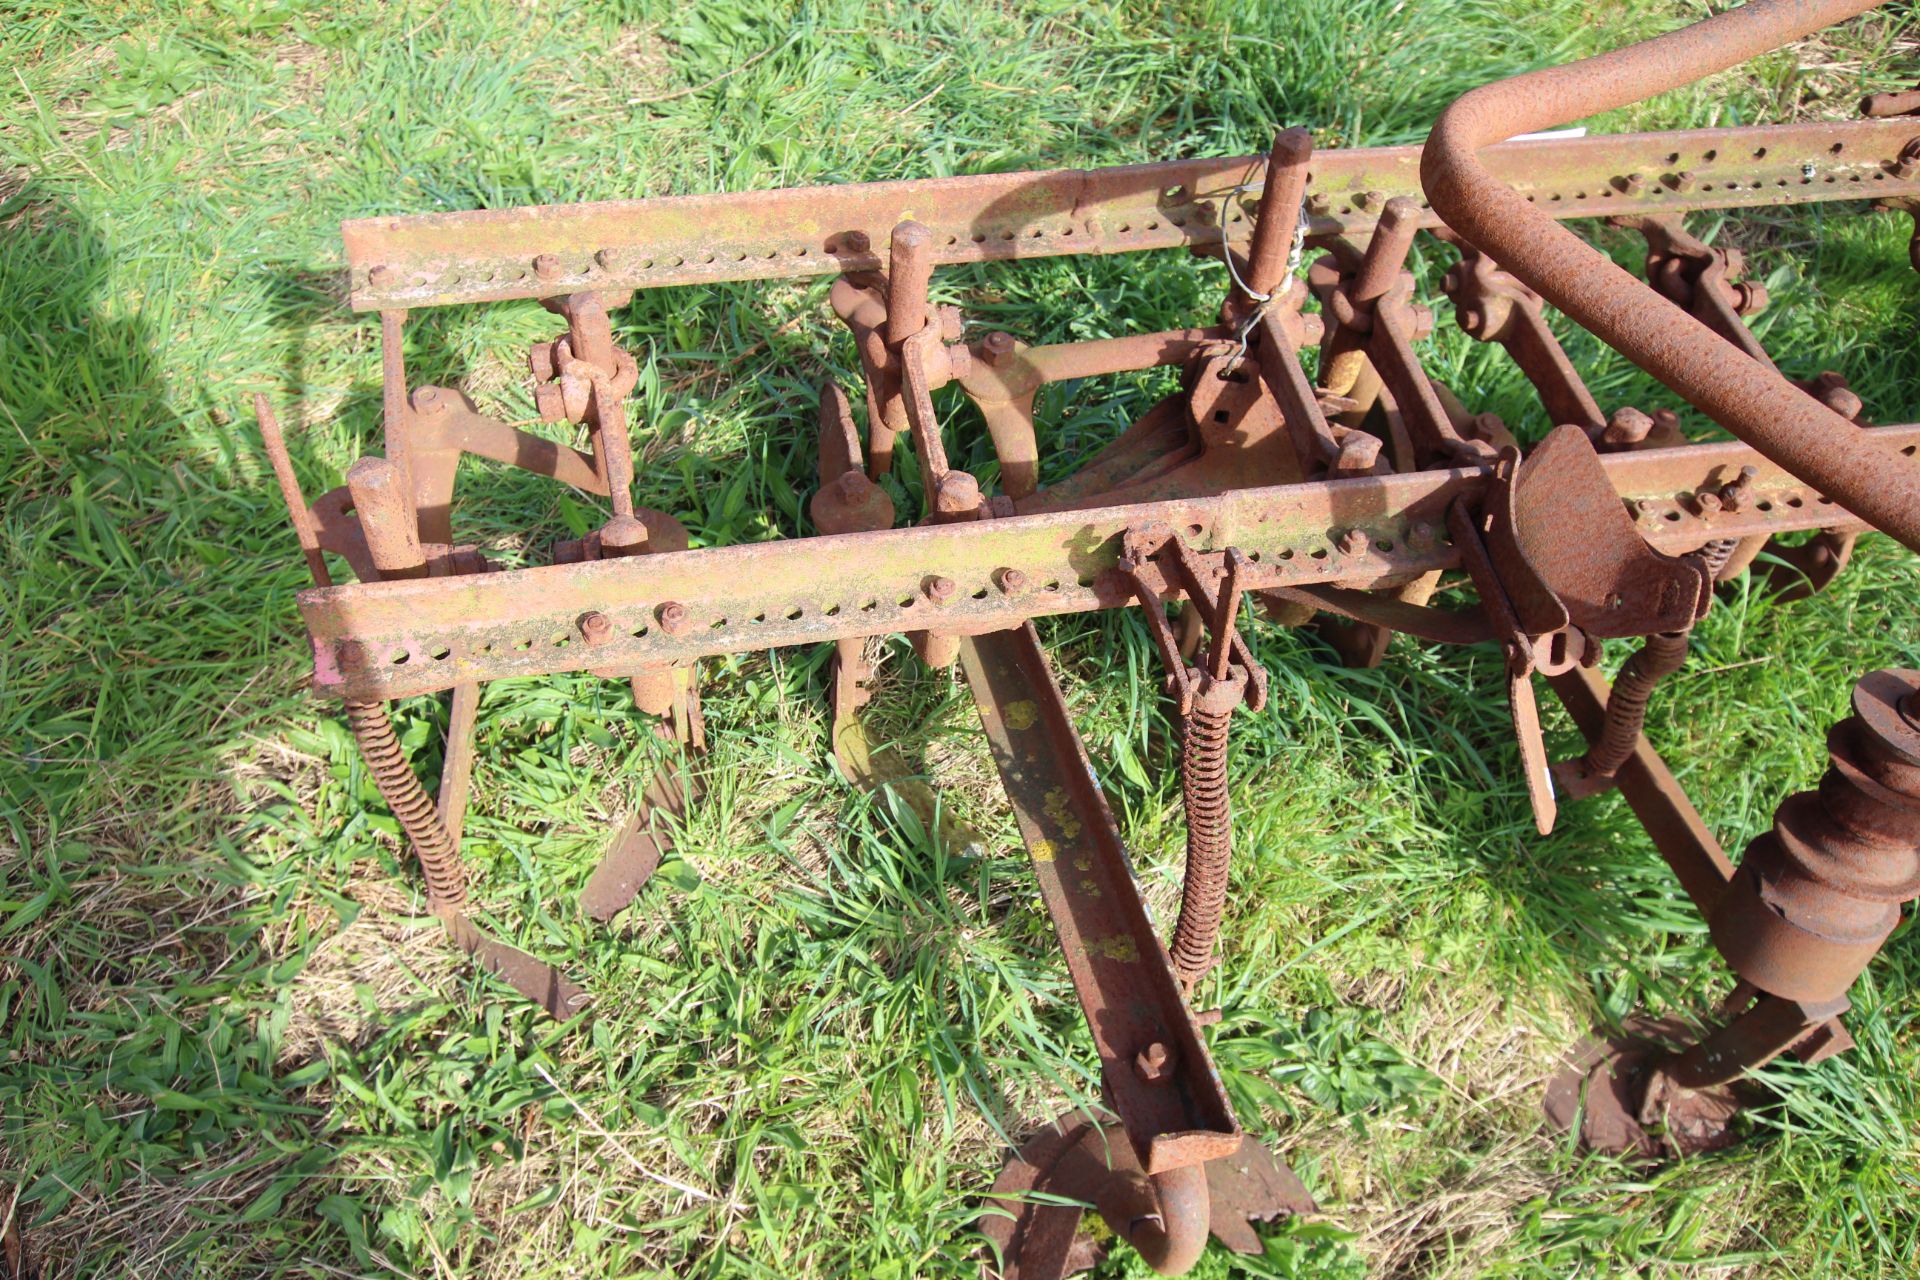 Ferguson BKE-20 extended steerage hoe. Serial number 3215. Owned from new. - Image 6 of 12